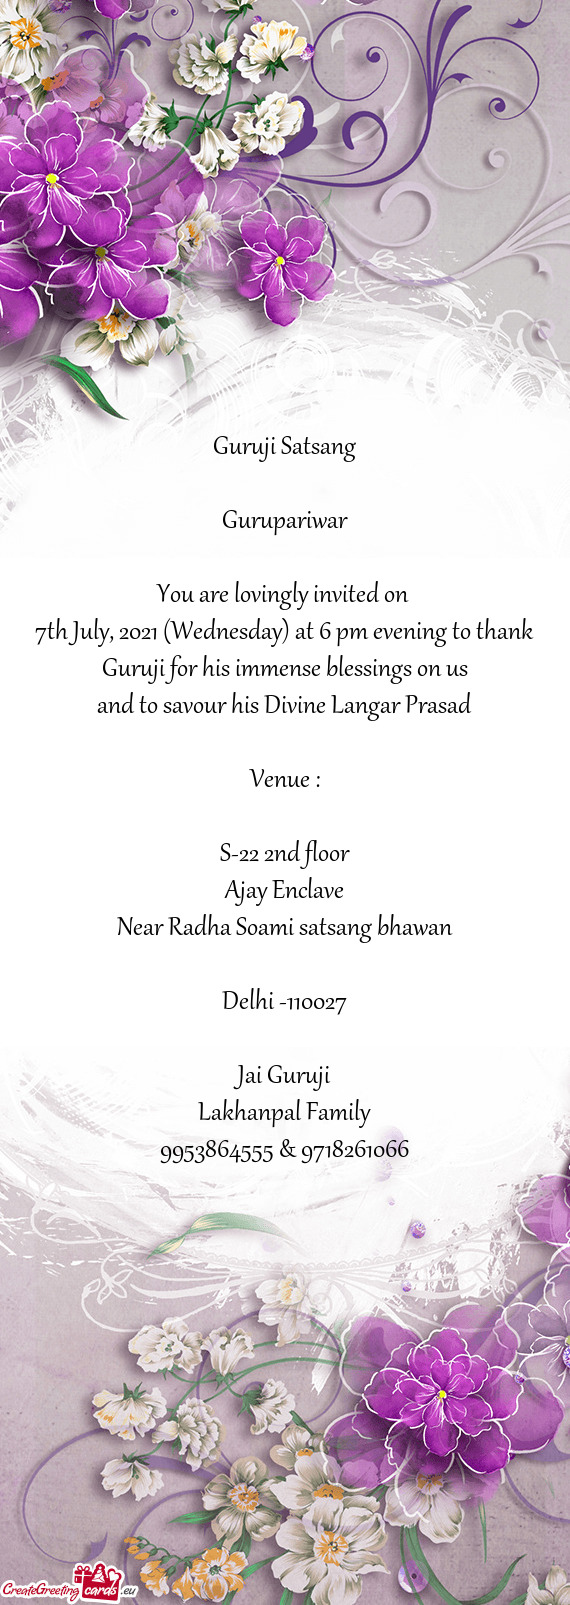 7th July, 2021 (Wednesday) at 6 pm evening to thank Guruji for his immense blessings on us